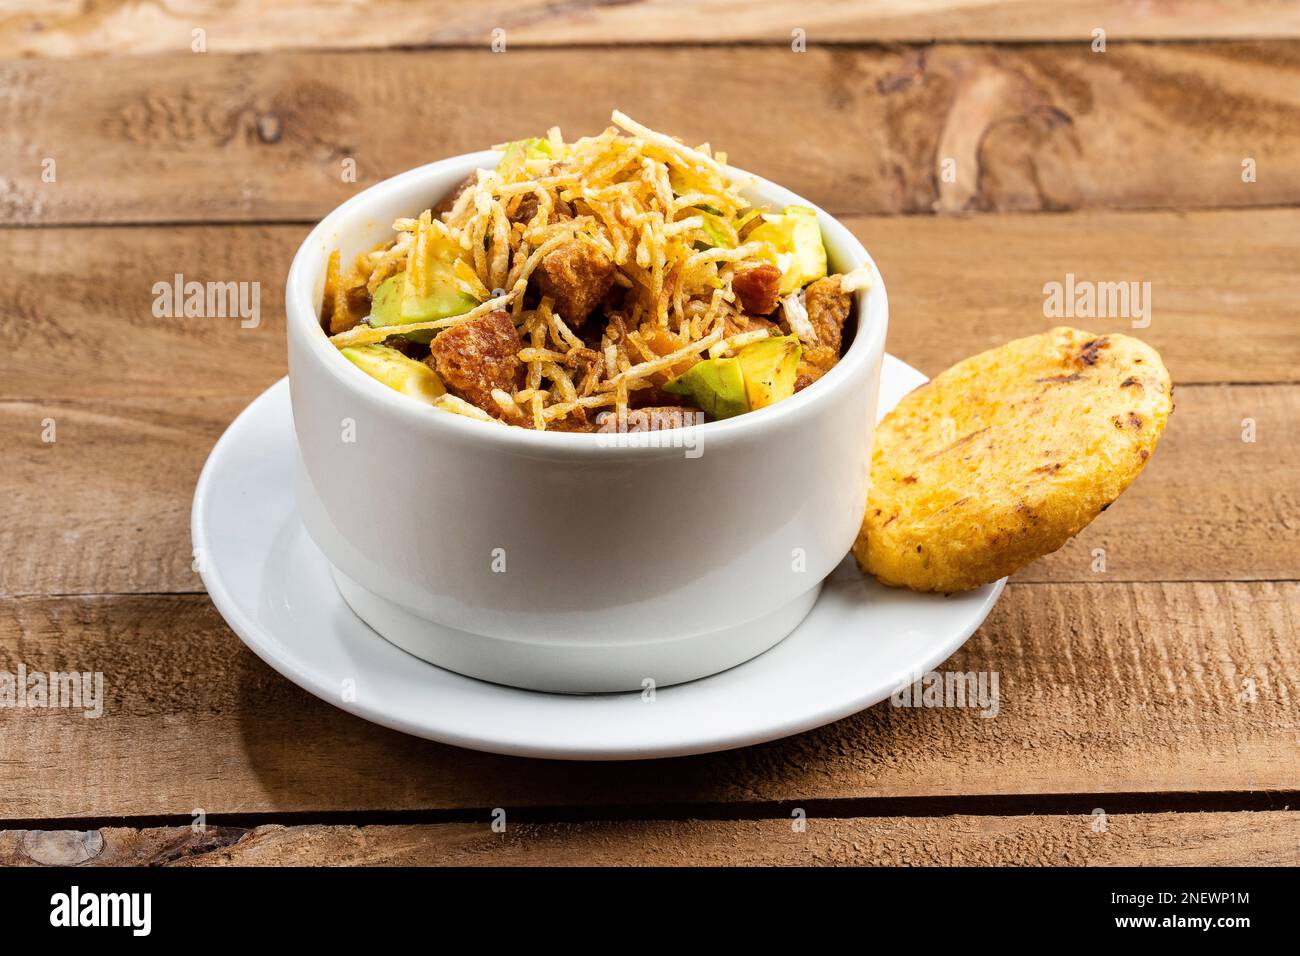 Cazuela paisa, typical dish from the Antioquia region of Colombia. Stock Photo